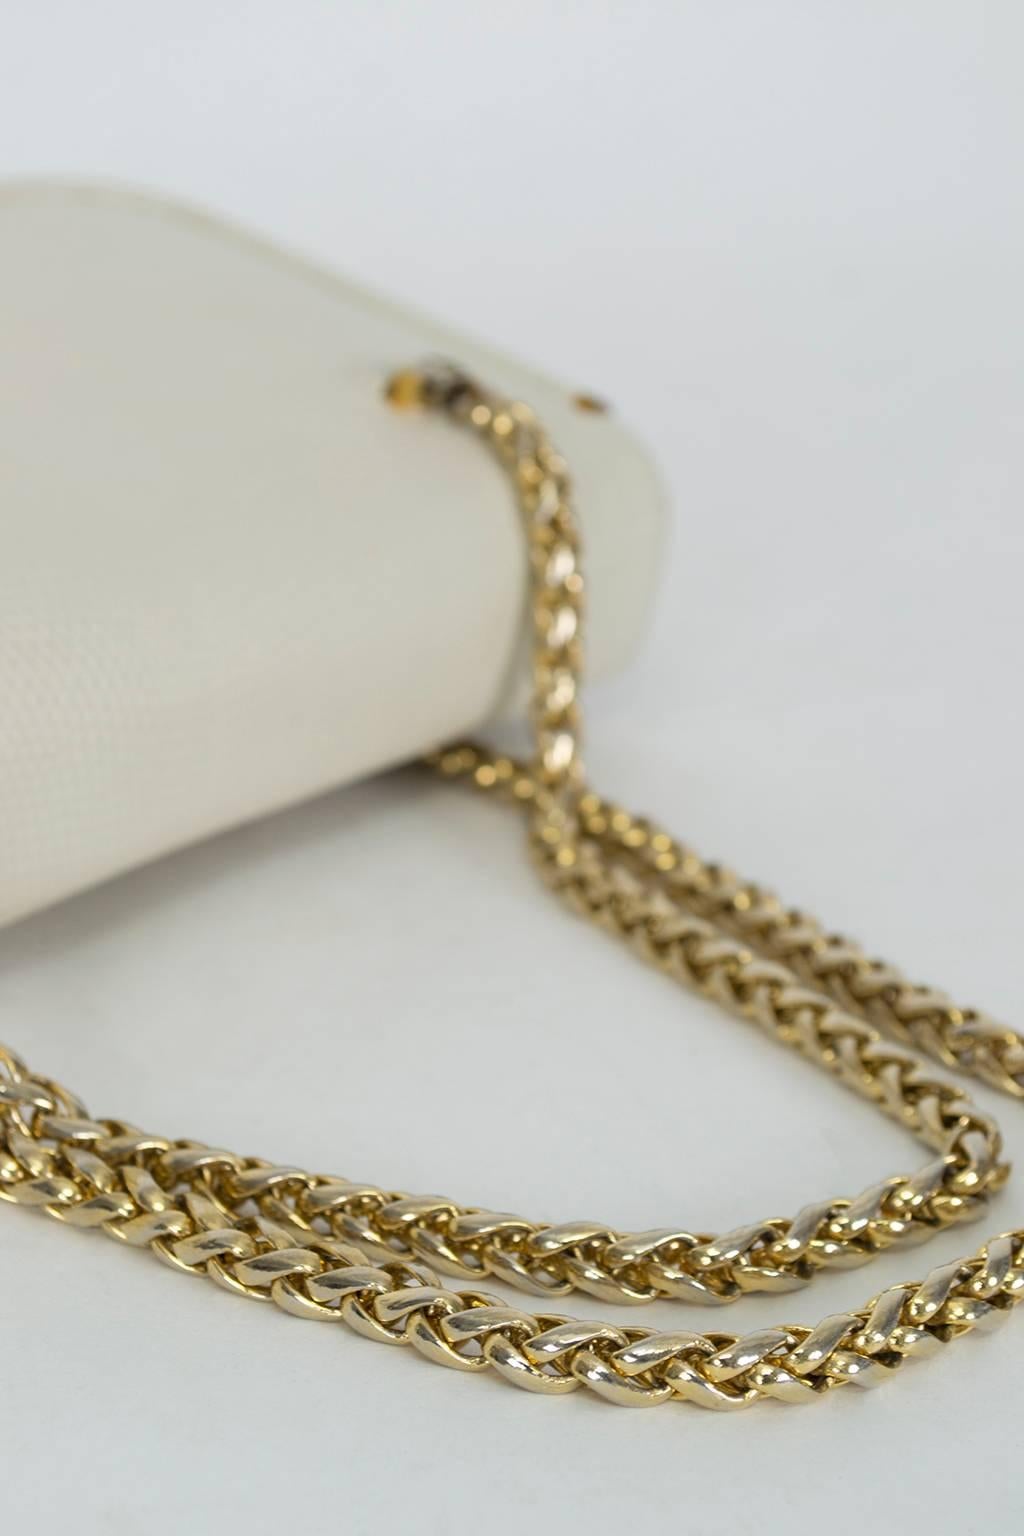 Judith Leiber Ivory Lizard Compartment Purse with Gold Chain Handles, 1980s For Sale 1